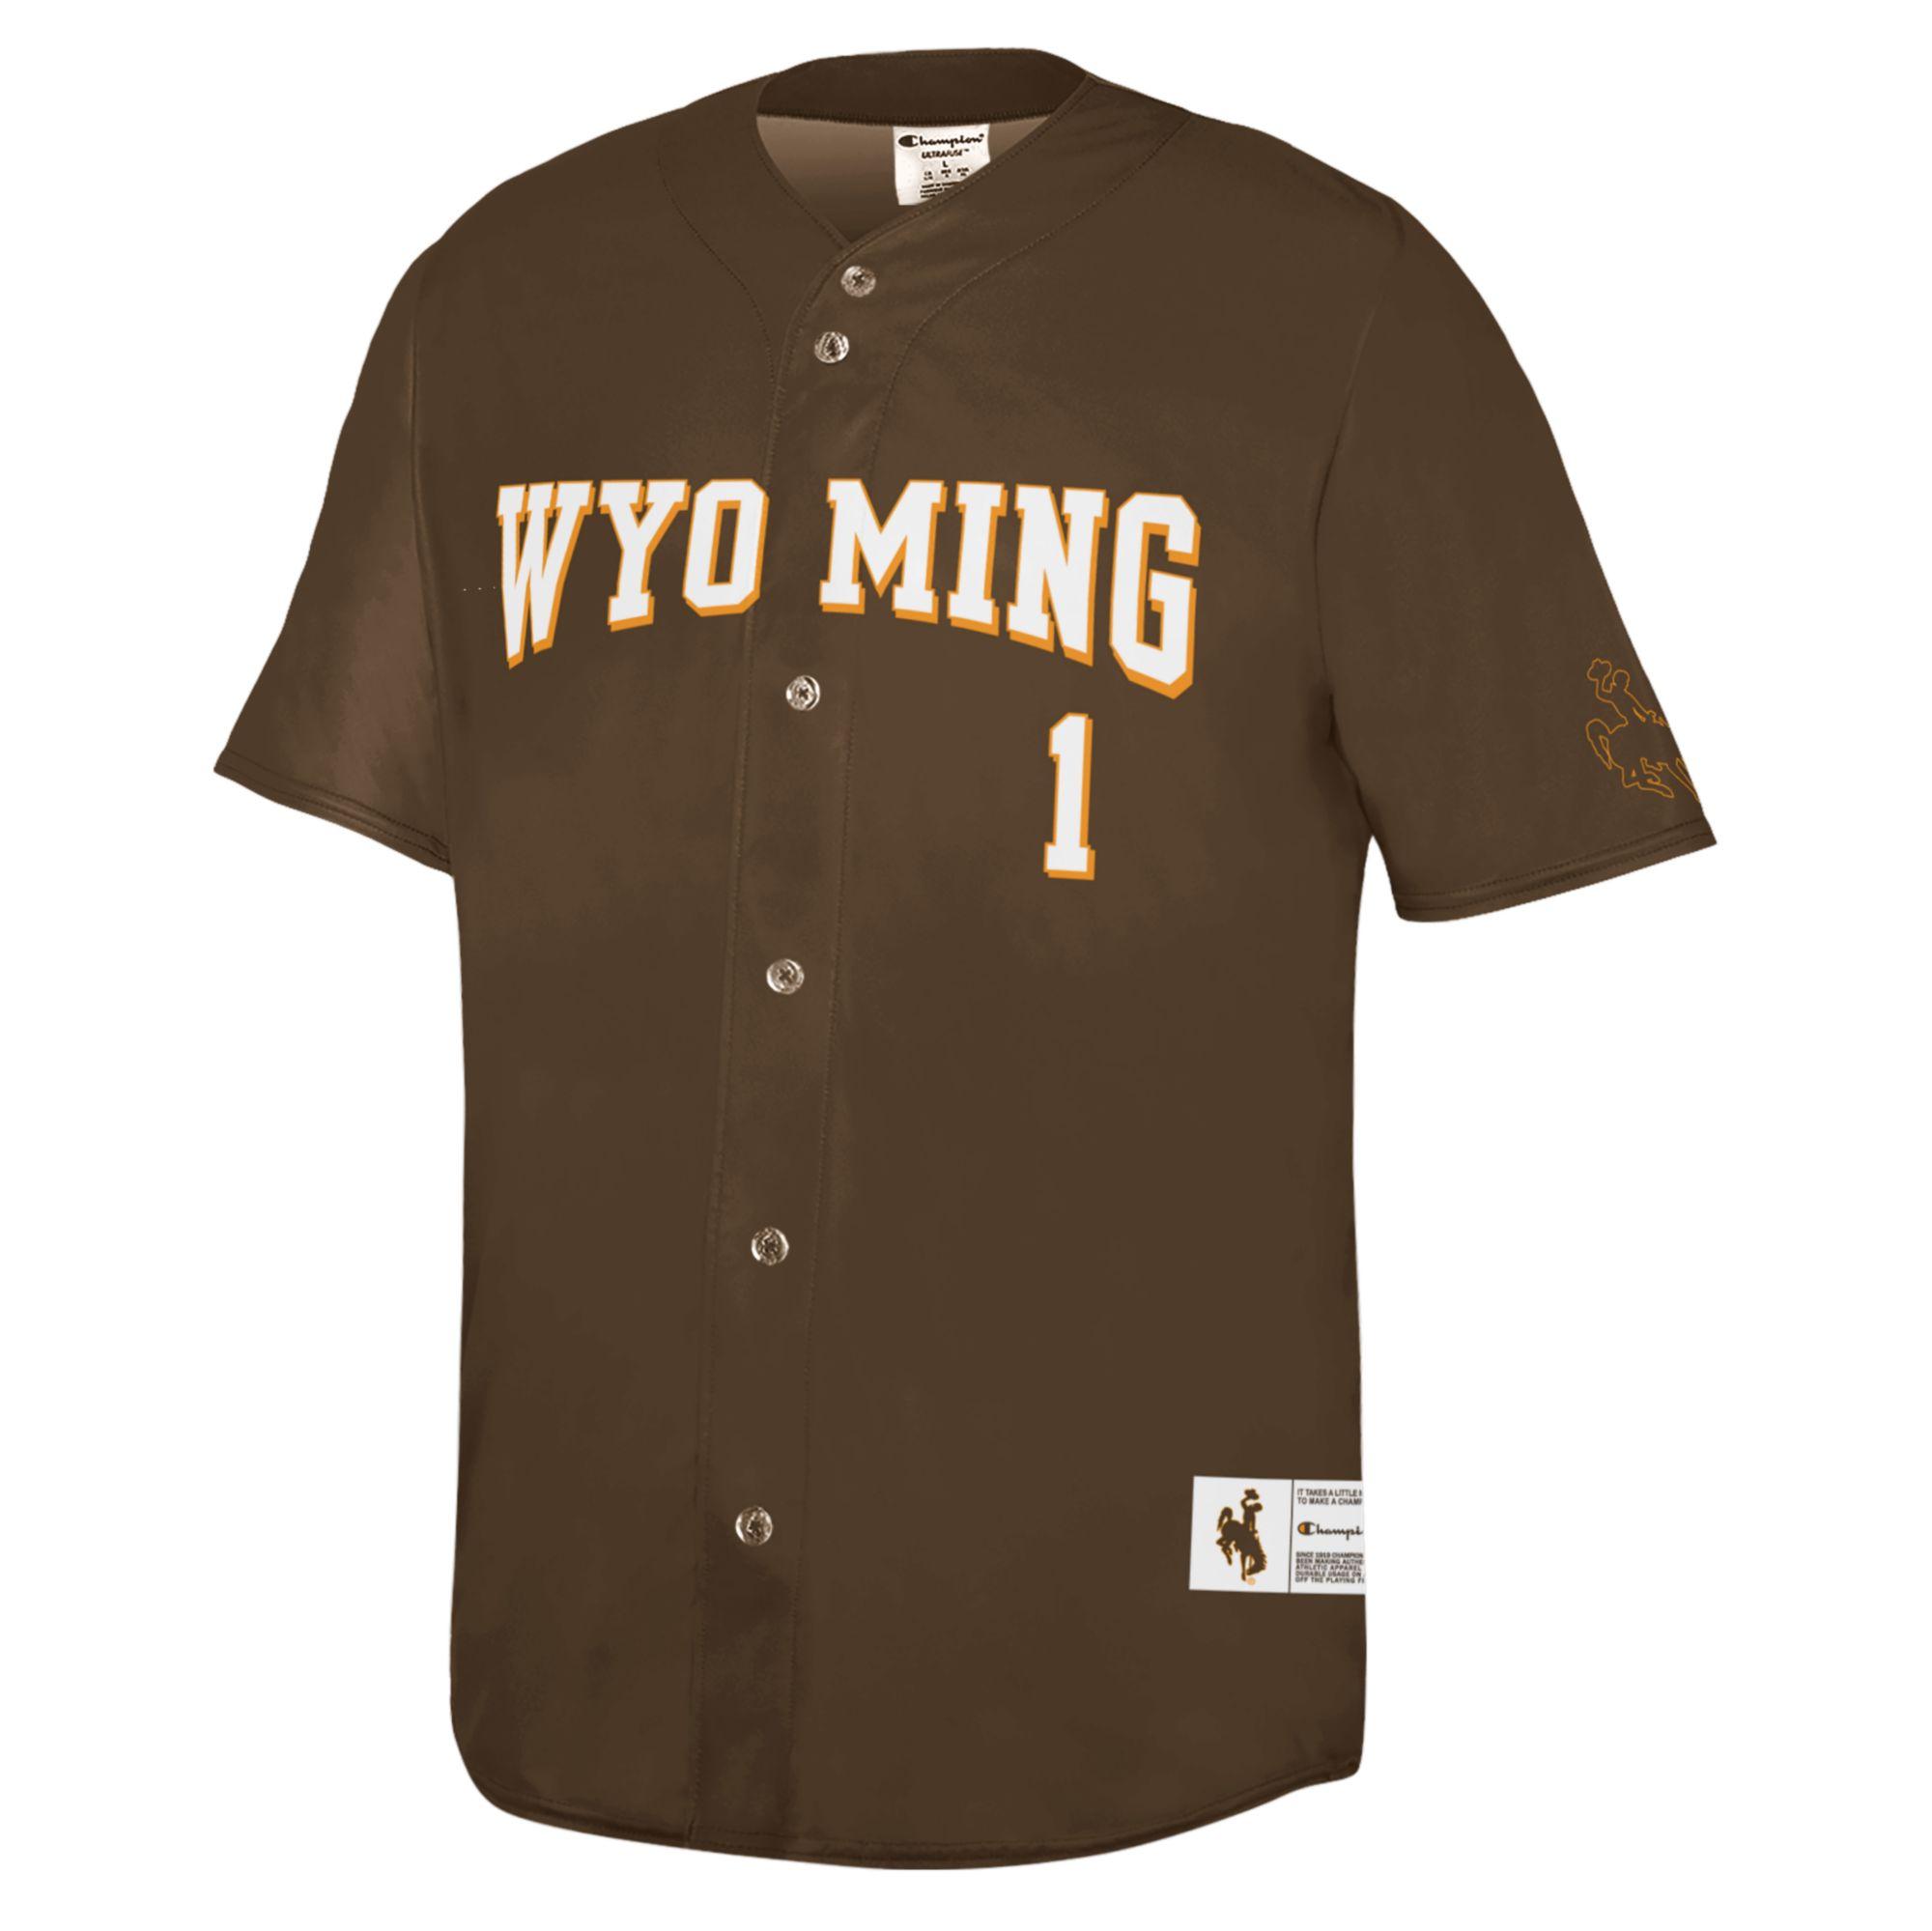 brown baseball jersey with wyoming in white with gold outline. number 1 under wyoming in white and gold. gold bucking horse outline on left sleeve